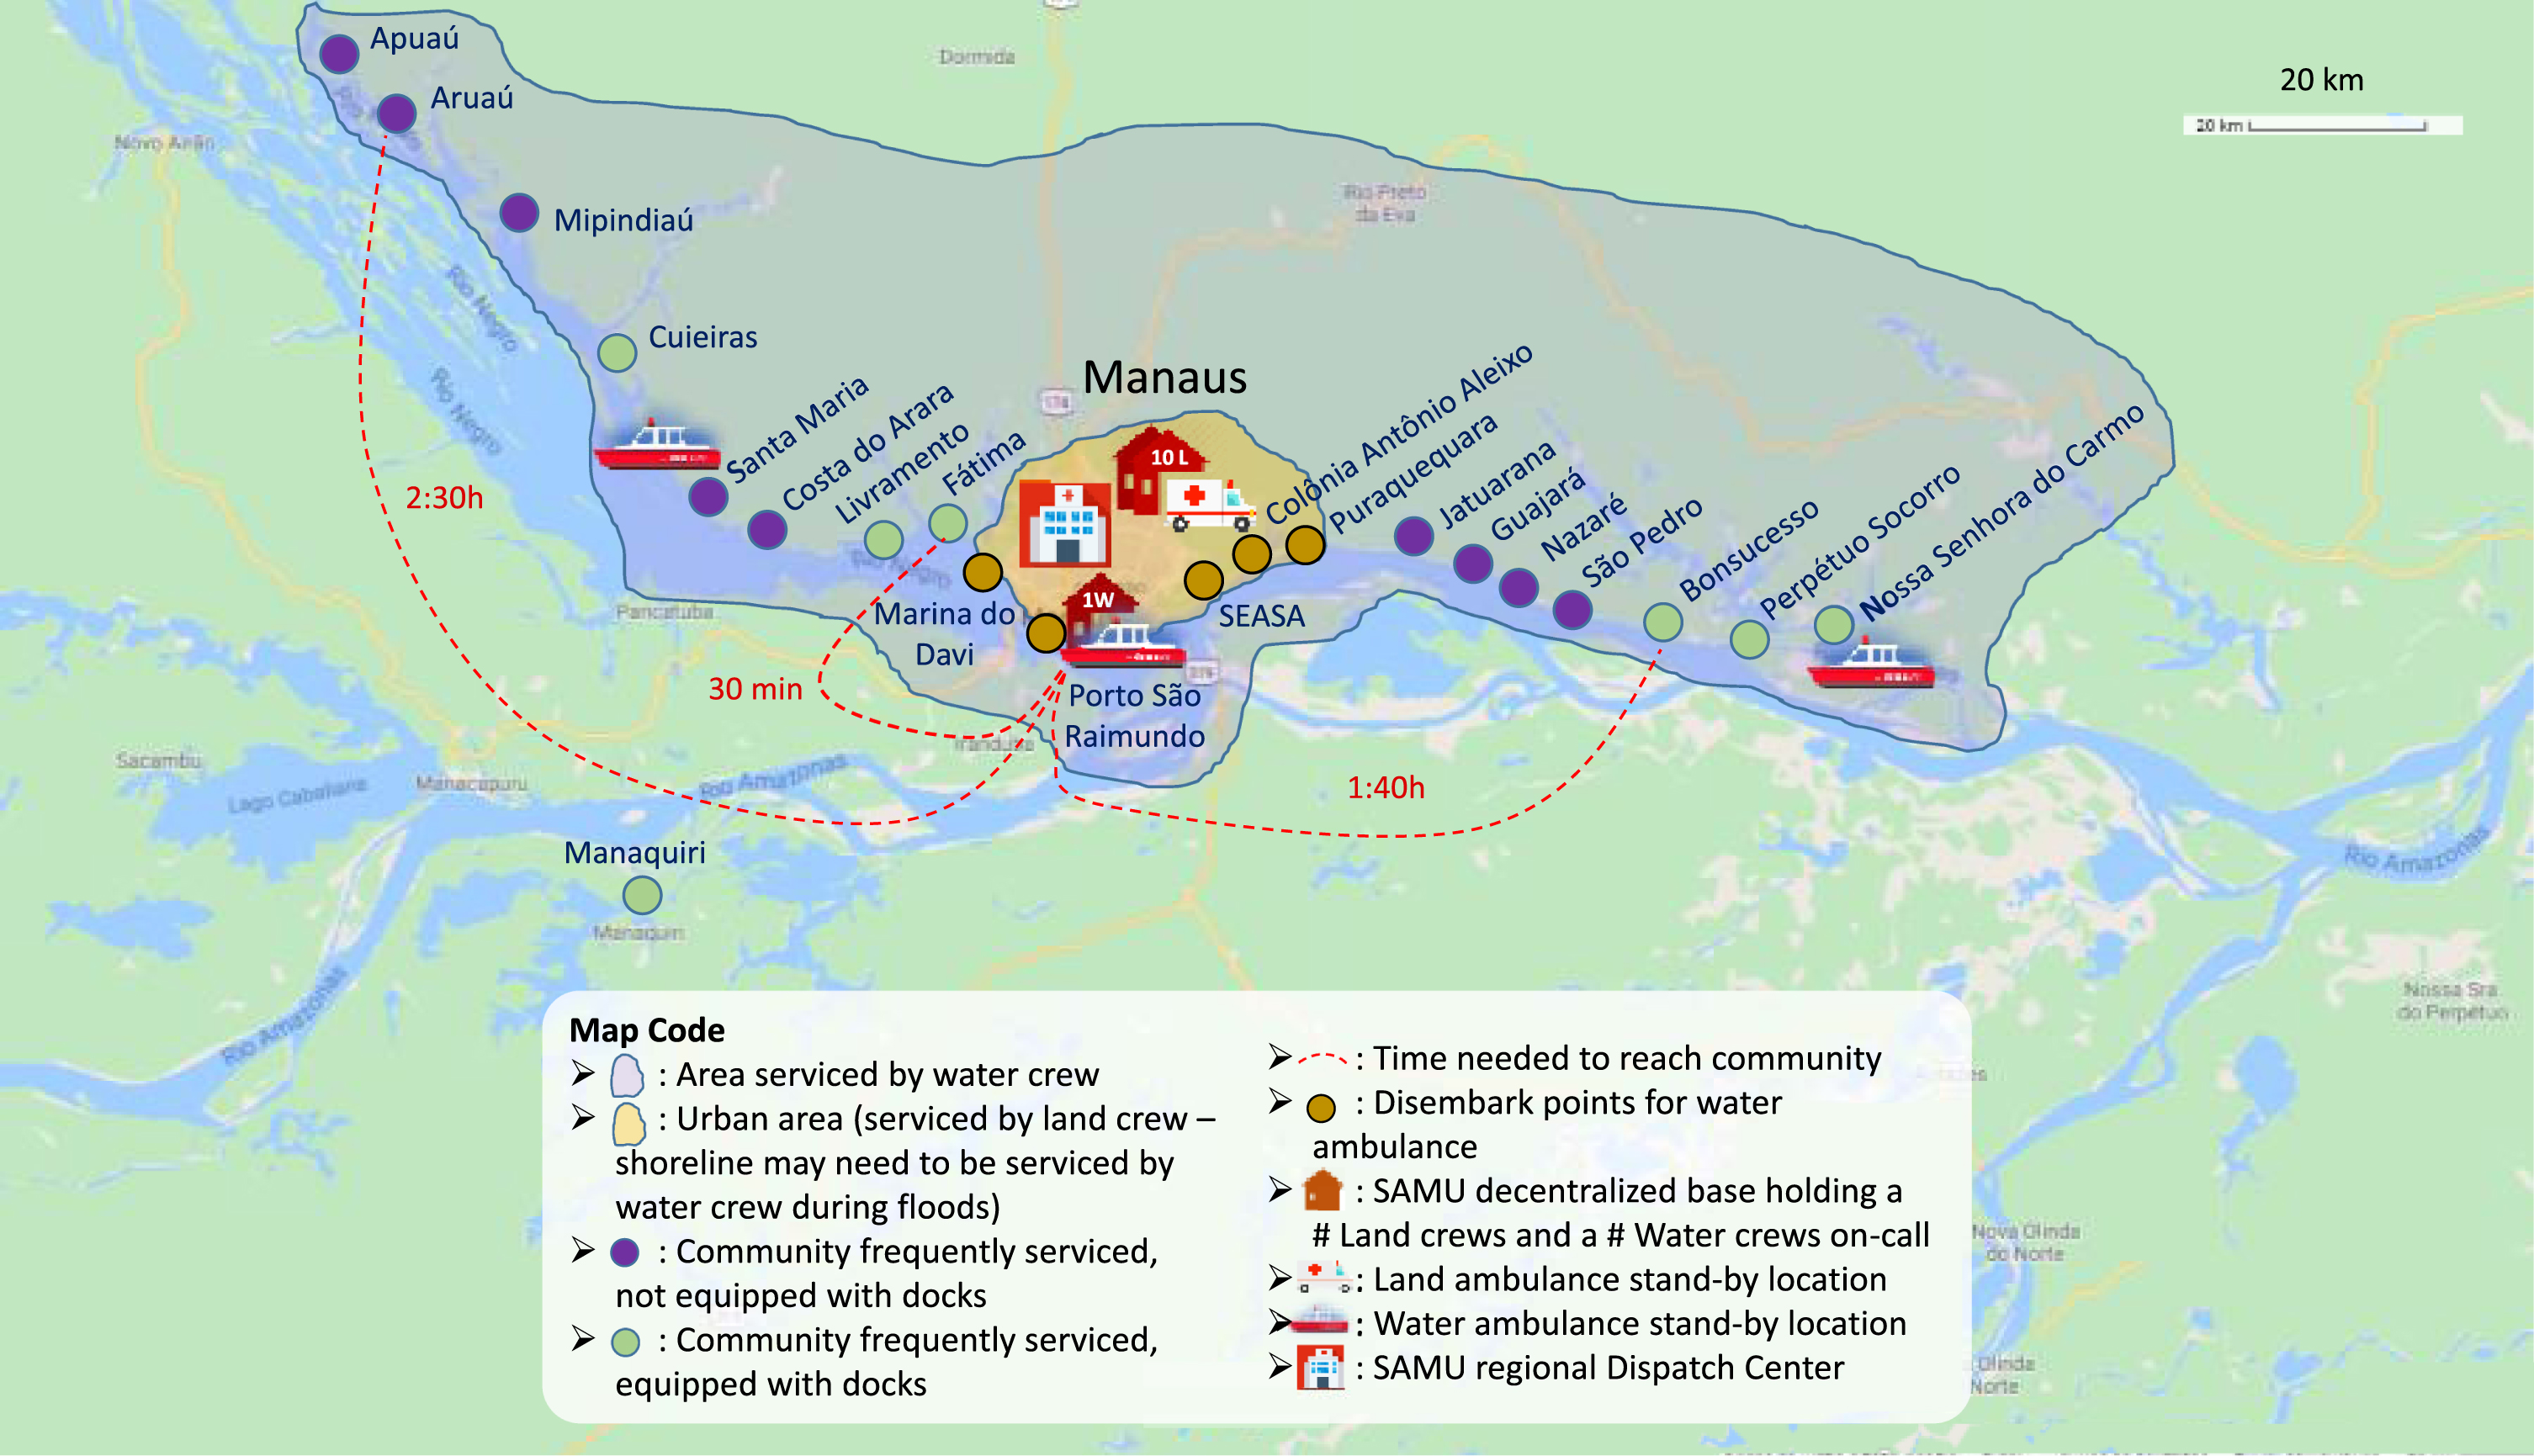 Operation map for the regional coordination of Manaus, Amazonas state.